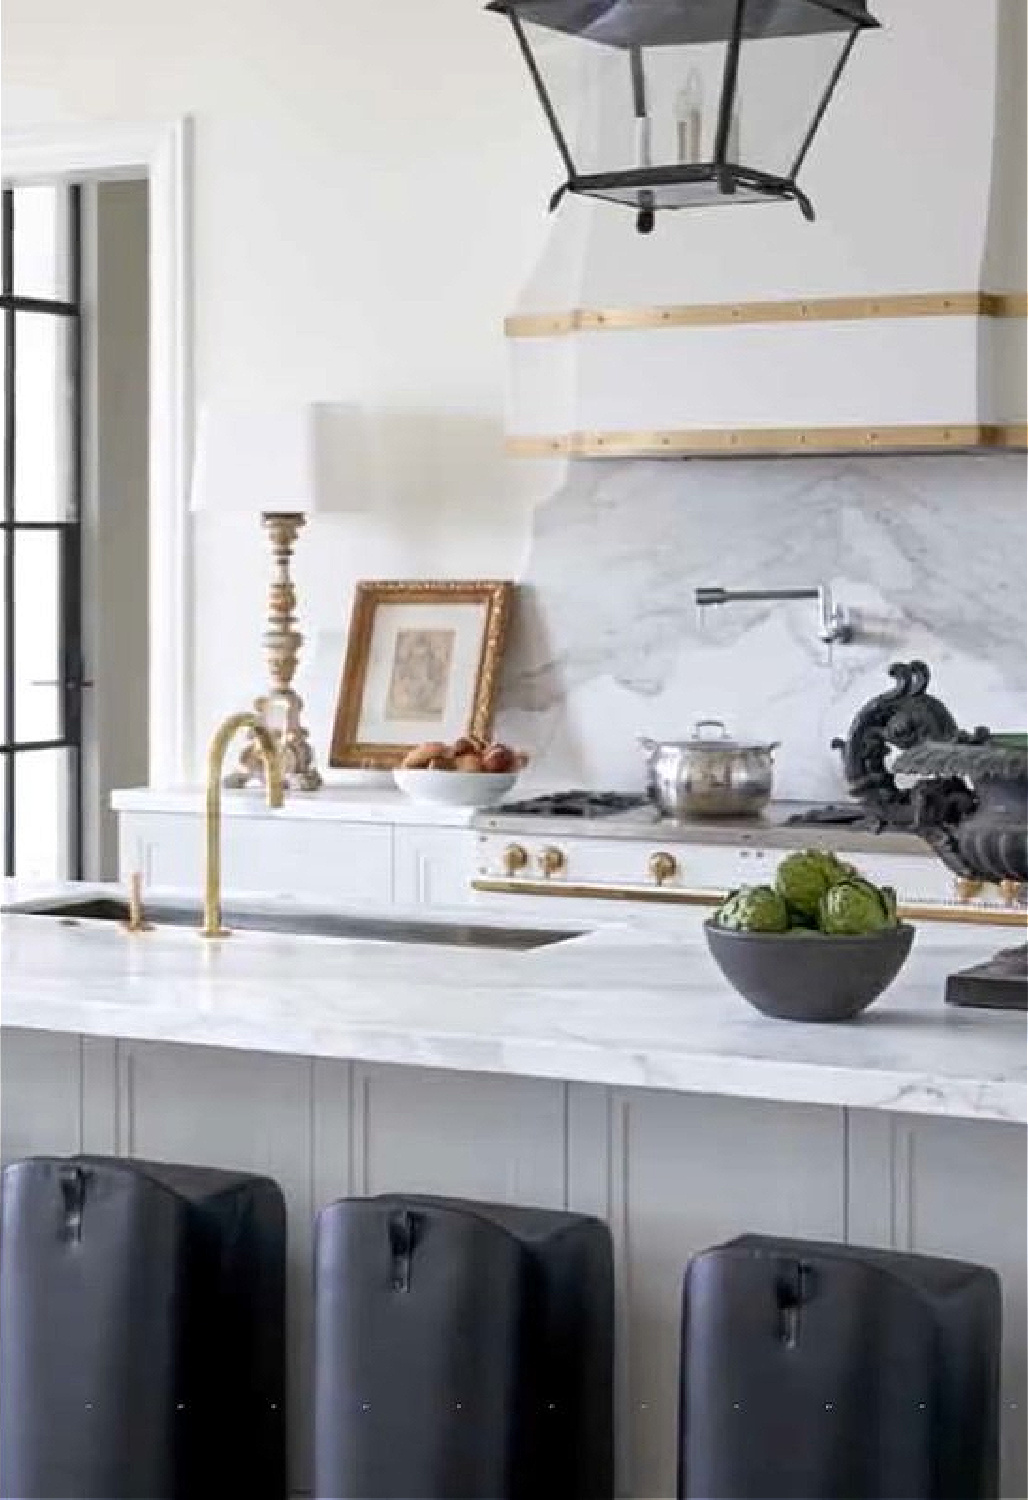 Tara Shaw designed kitchen with modern black counter stools, brass accents, antiques and white marble - @tarashawdesign.